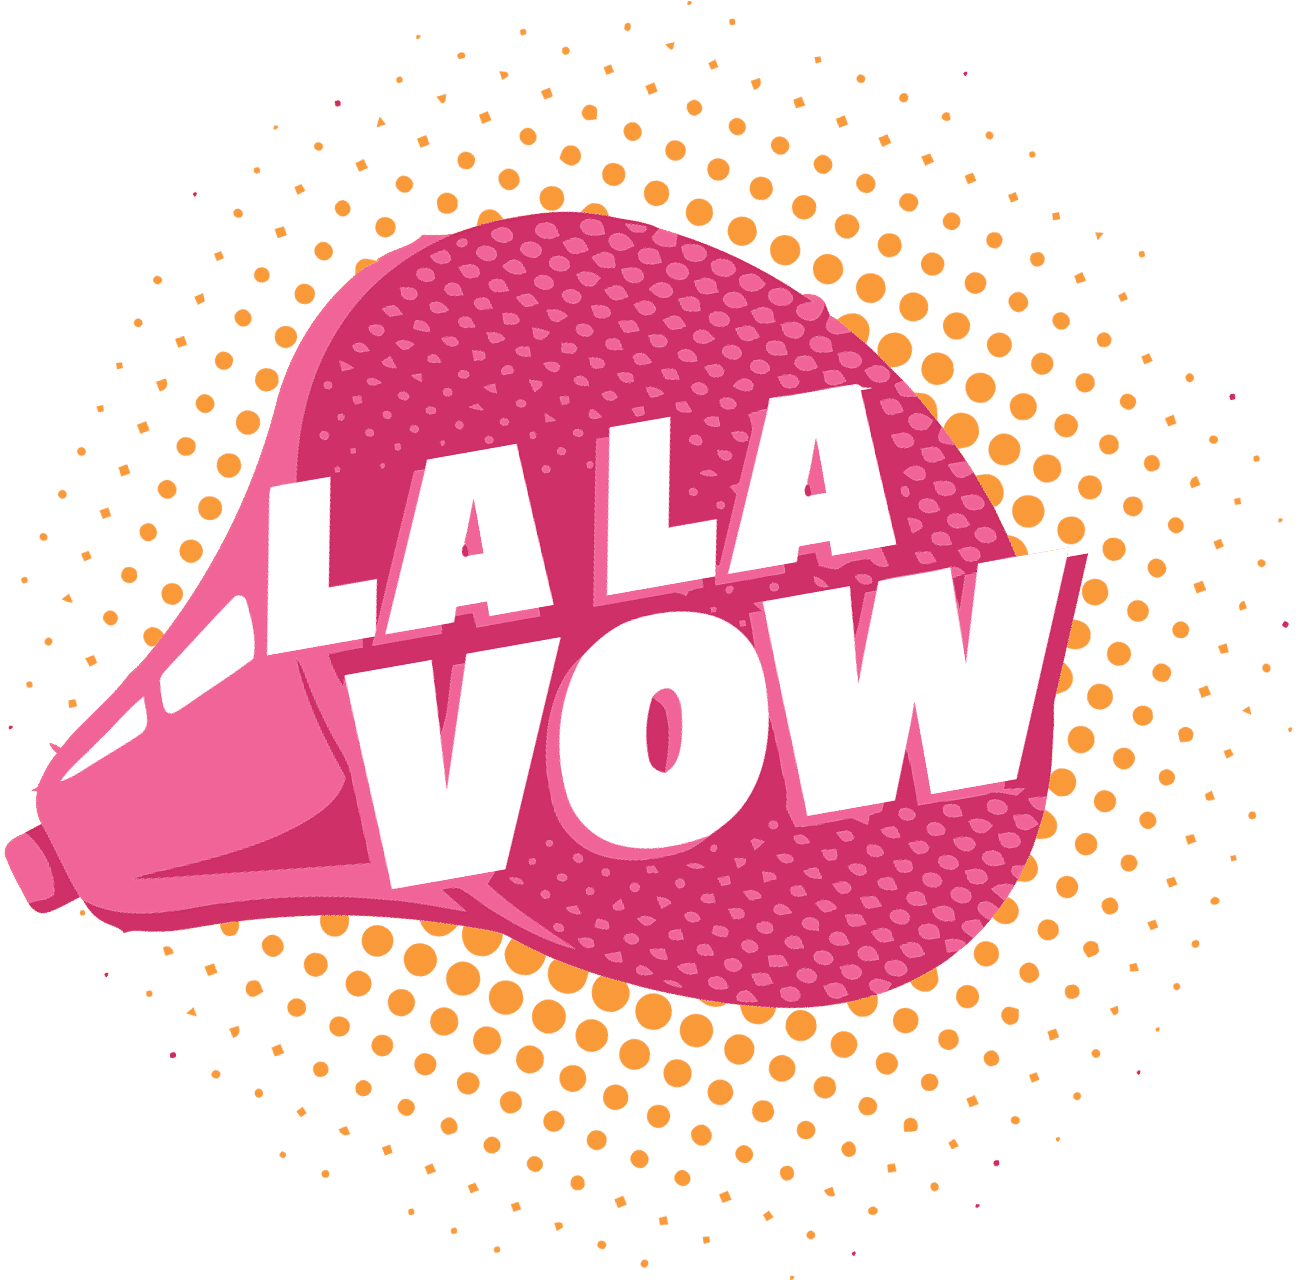 LALA VOW